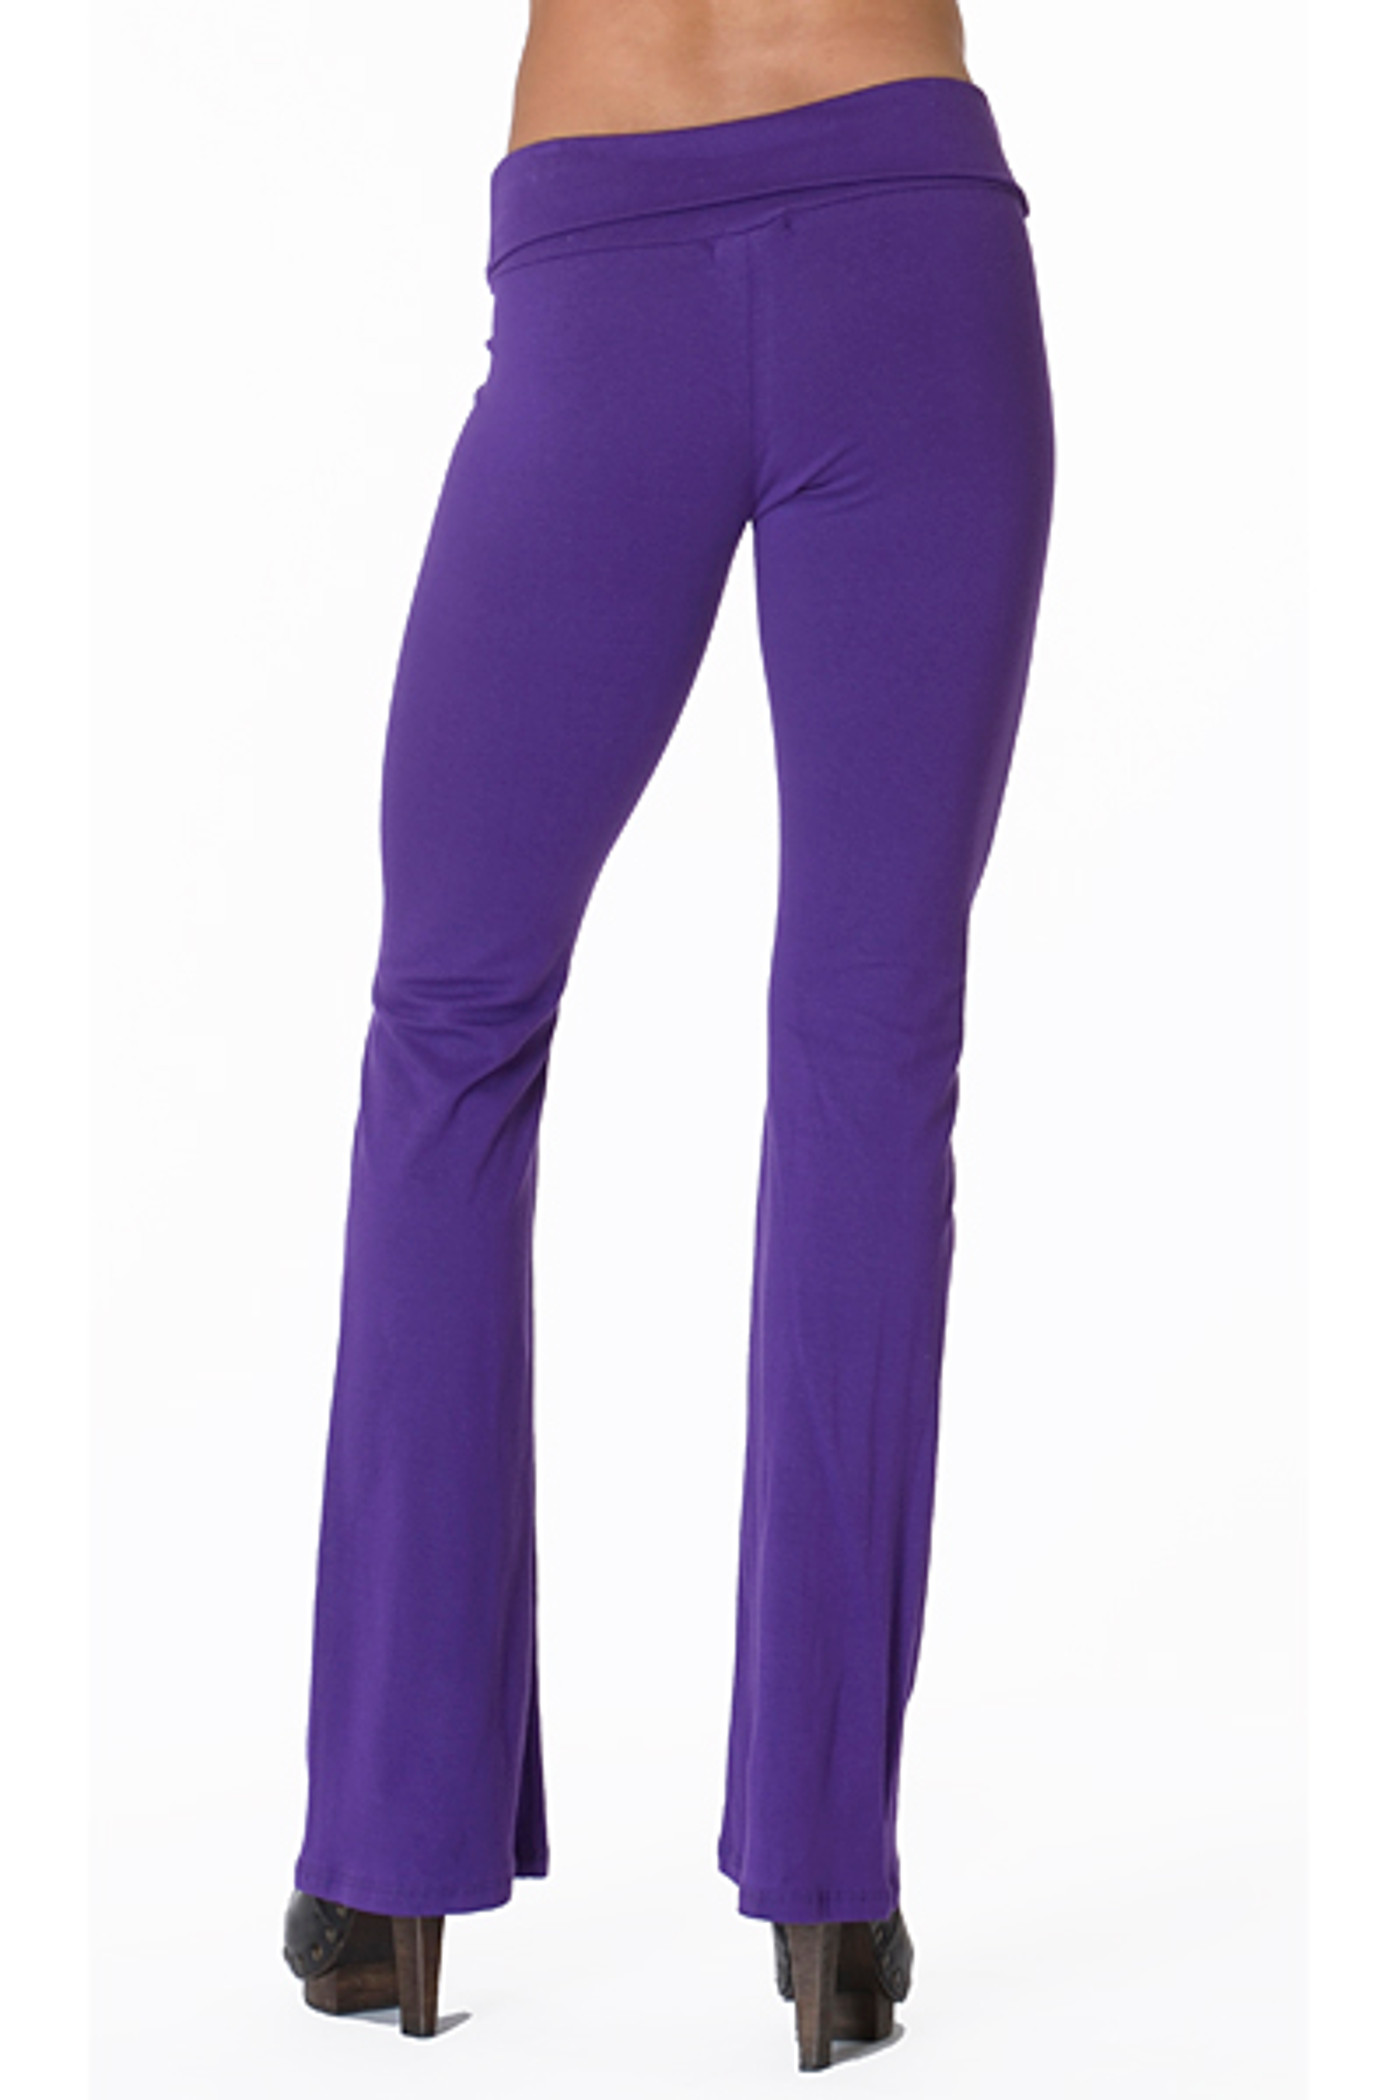 VSPINK cotton foldover flare leggings!! THANK ME LATER. size xs, shor, Fold  Over Flare Pants